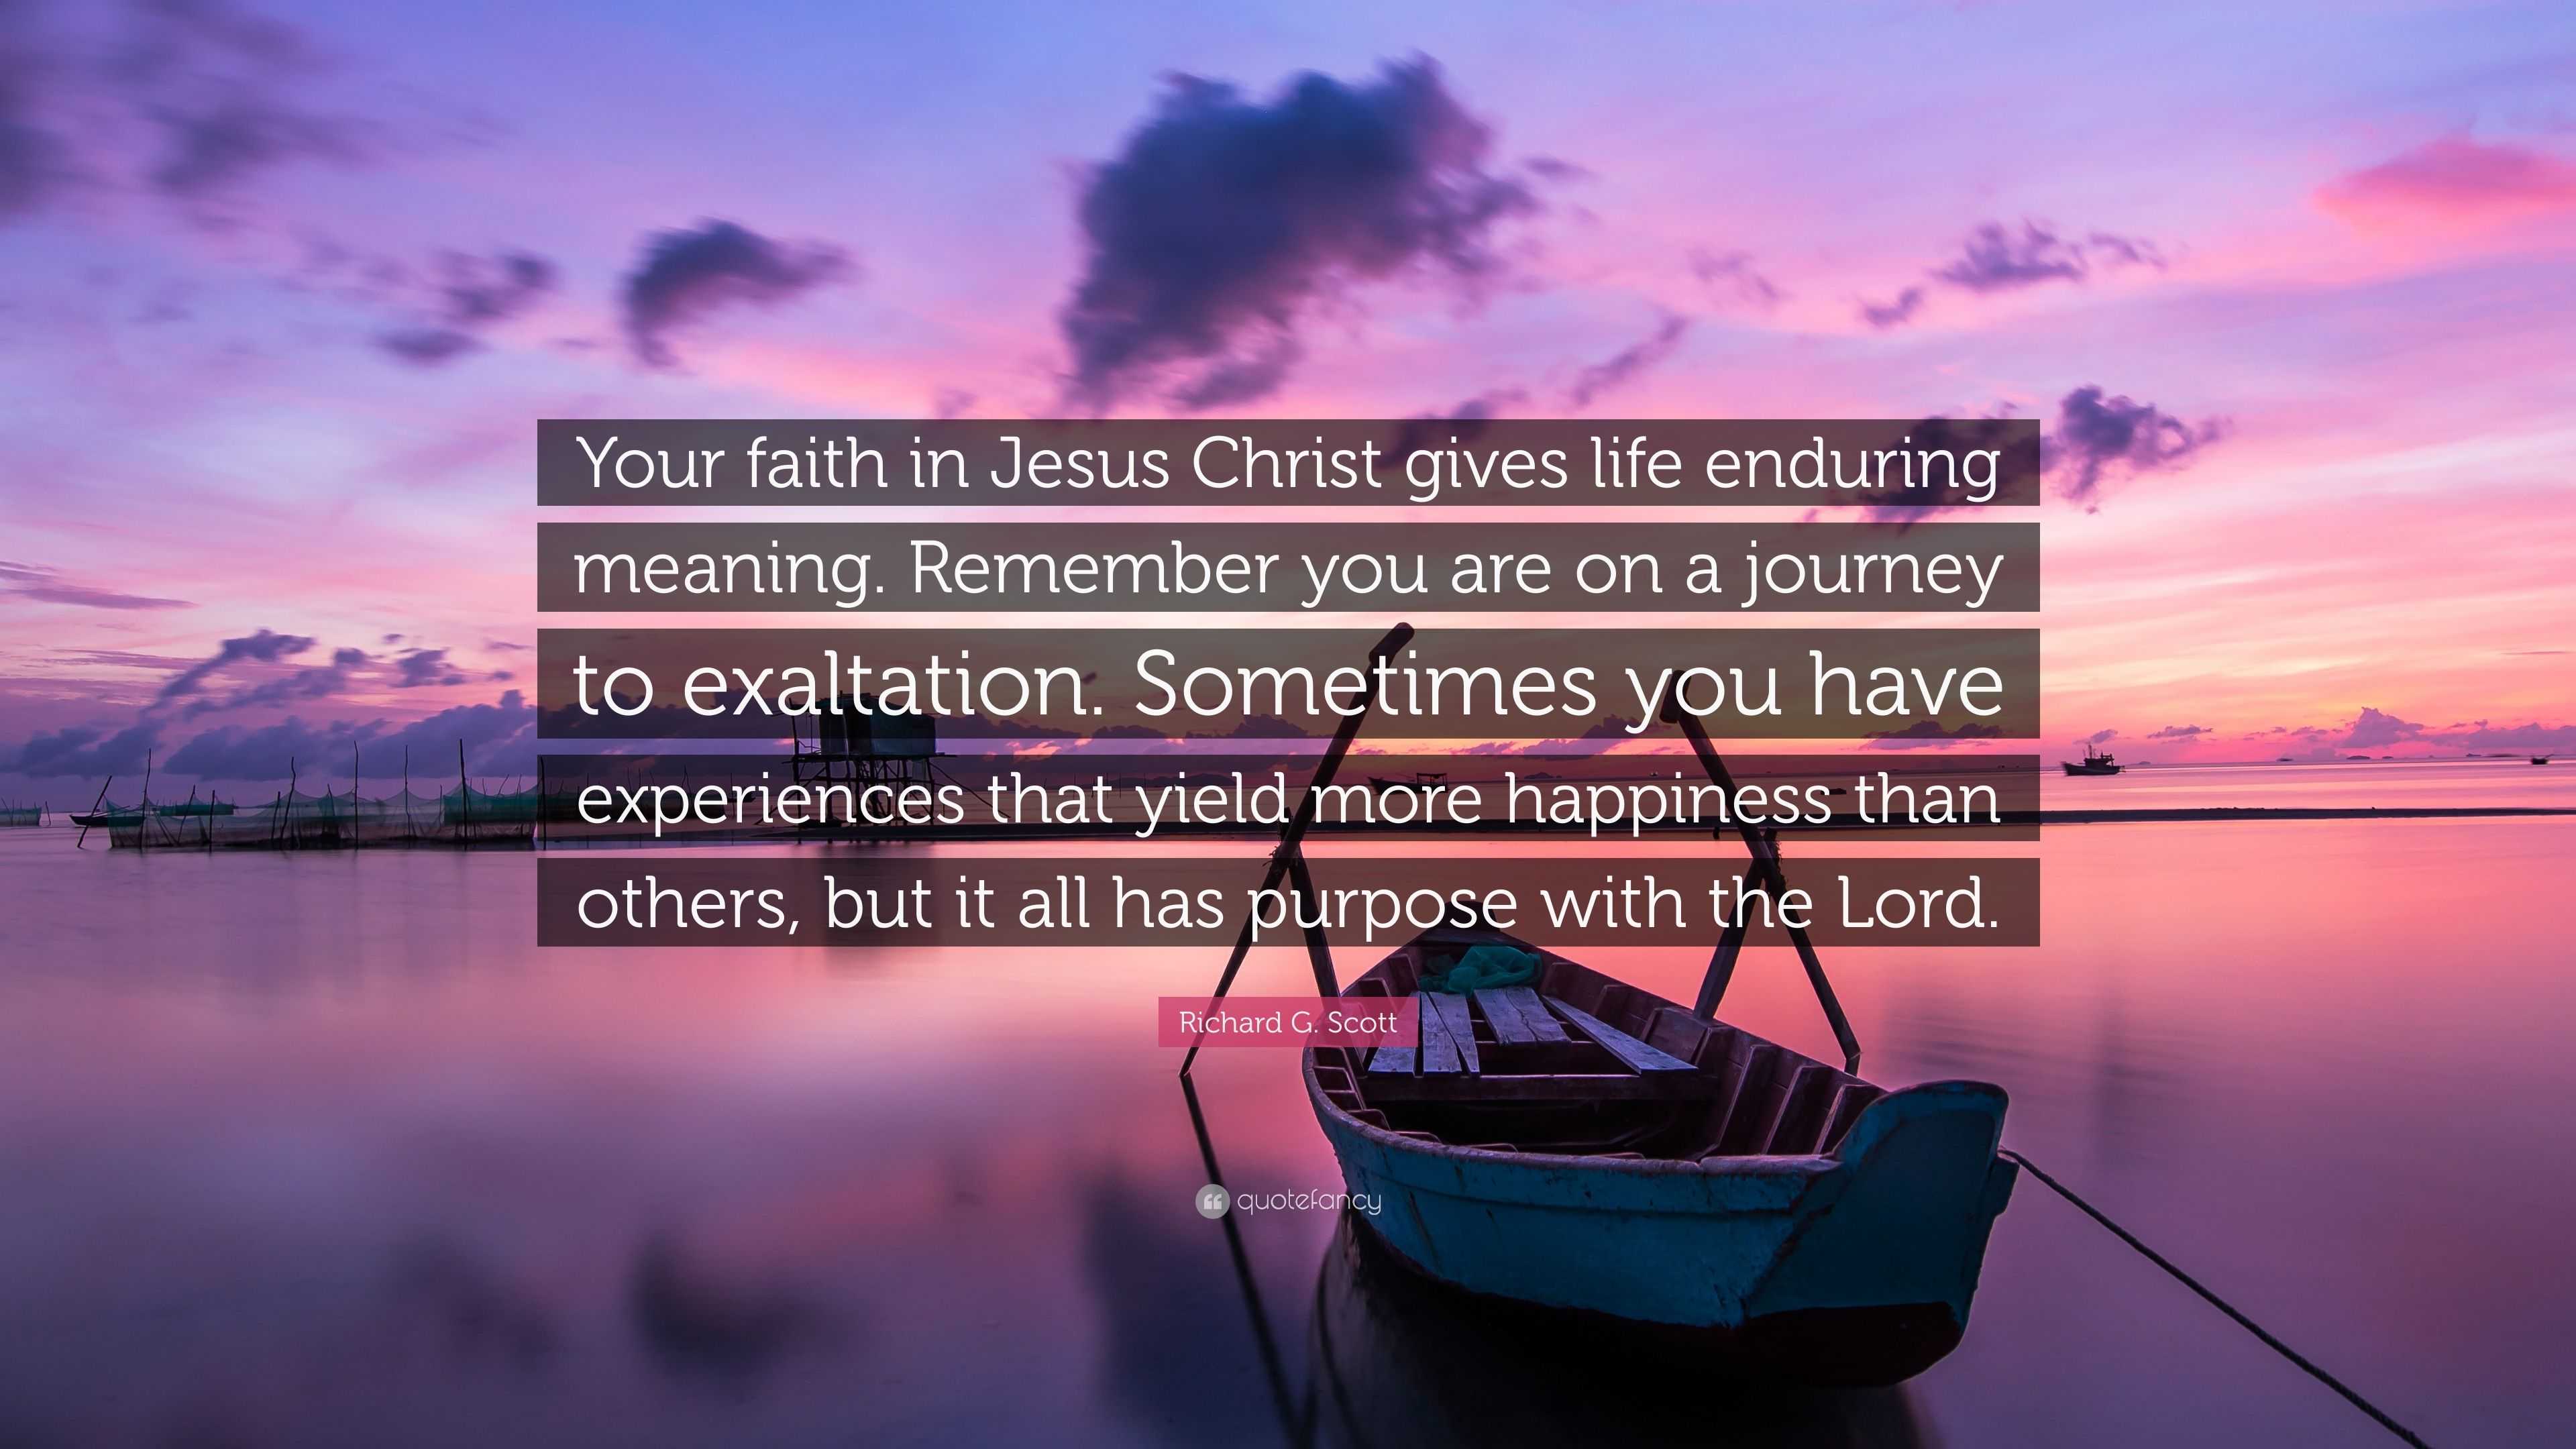 Download Richard G. Scott Quote: "Your faith in Jesus Christ gives ...